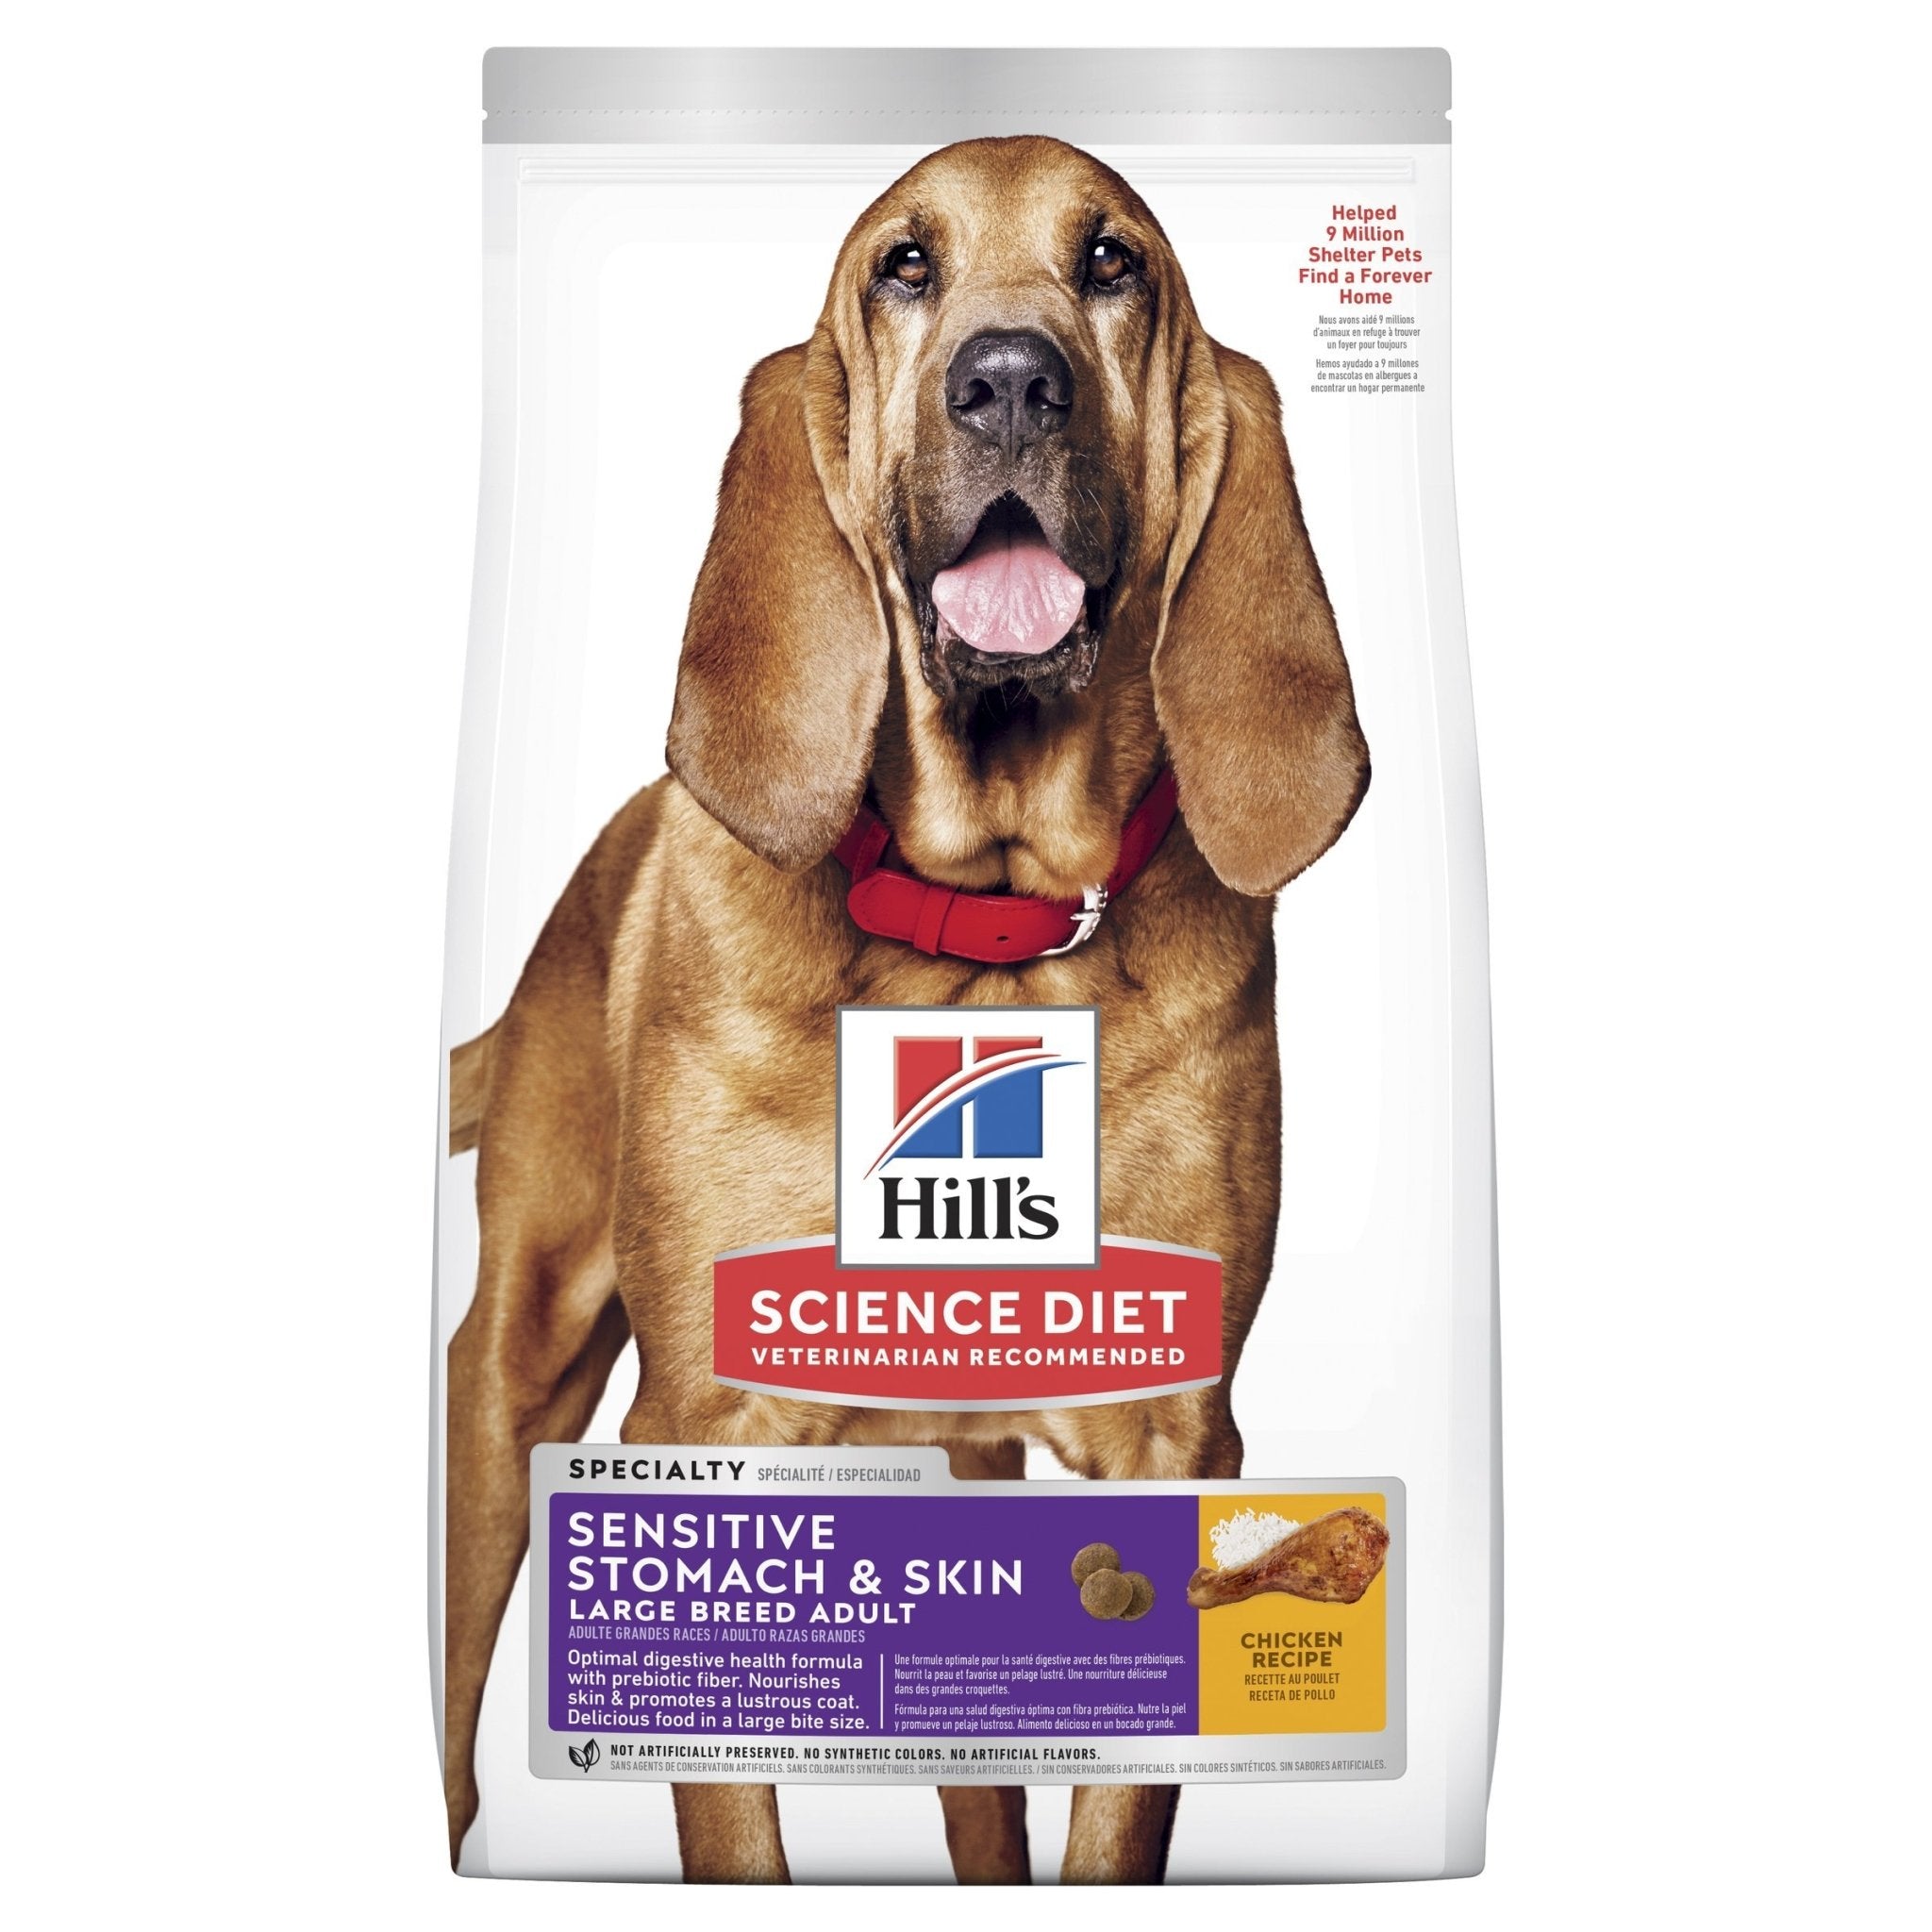 Hill's Science Diet Sensitive Stomach & Skin Adult Large Breed Dry Dog Food 13.6kg